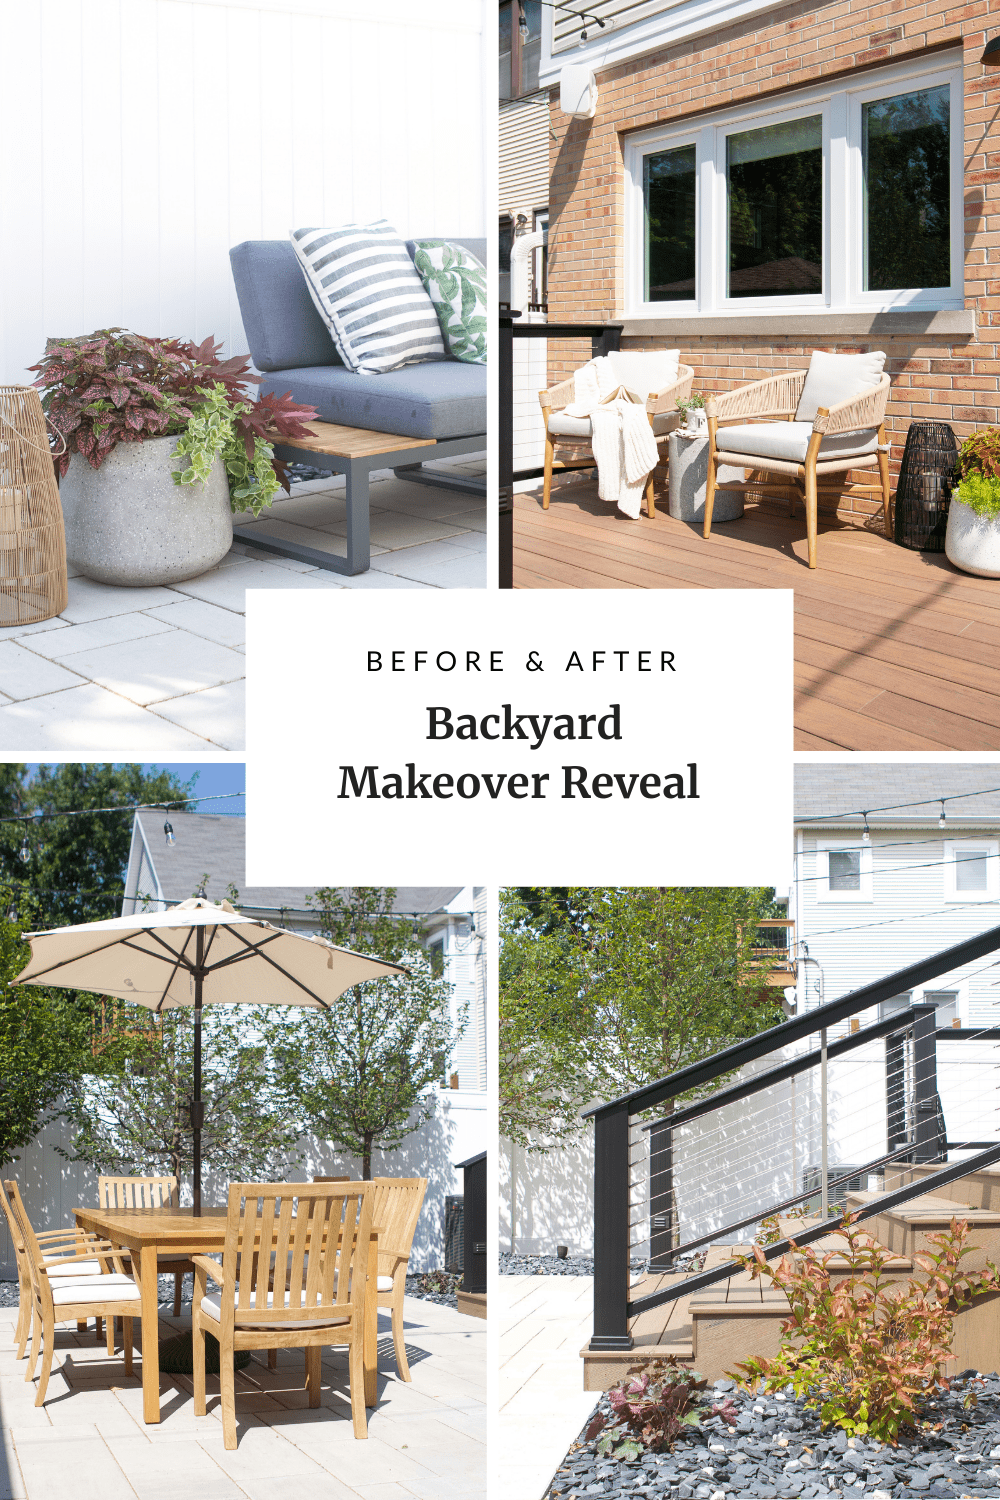 Our backyard makeover reveal